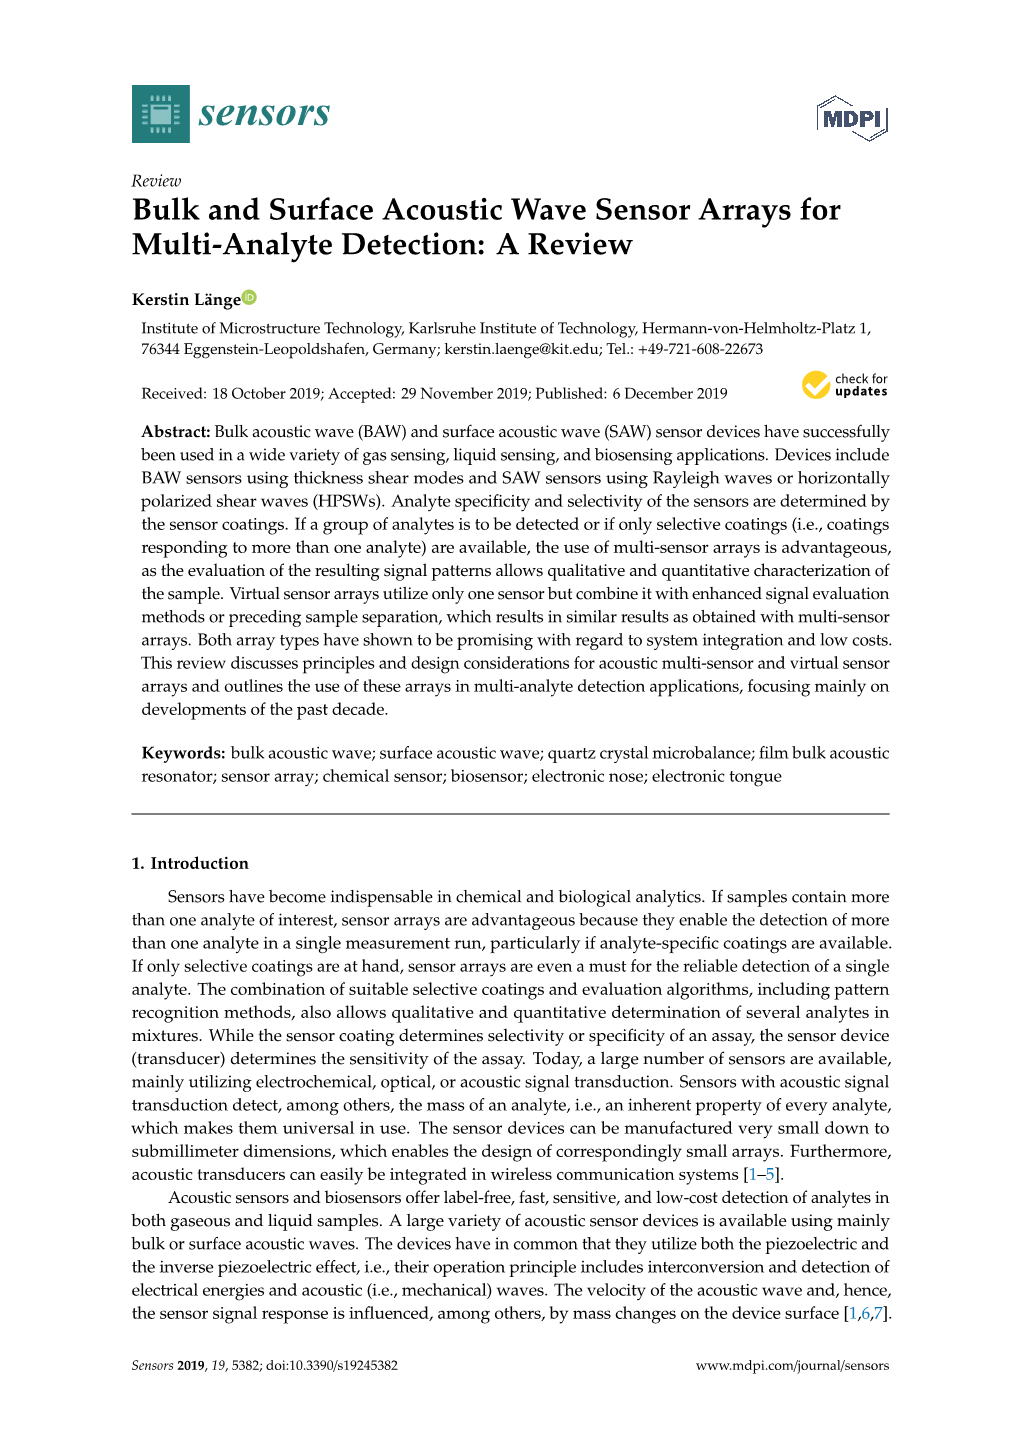 Bulk and Surface Acoustic Wave Sensor Arrays for Multi-Analyte Detection: a Review